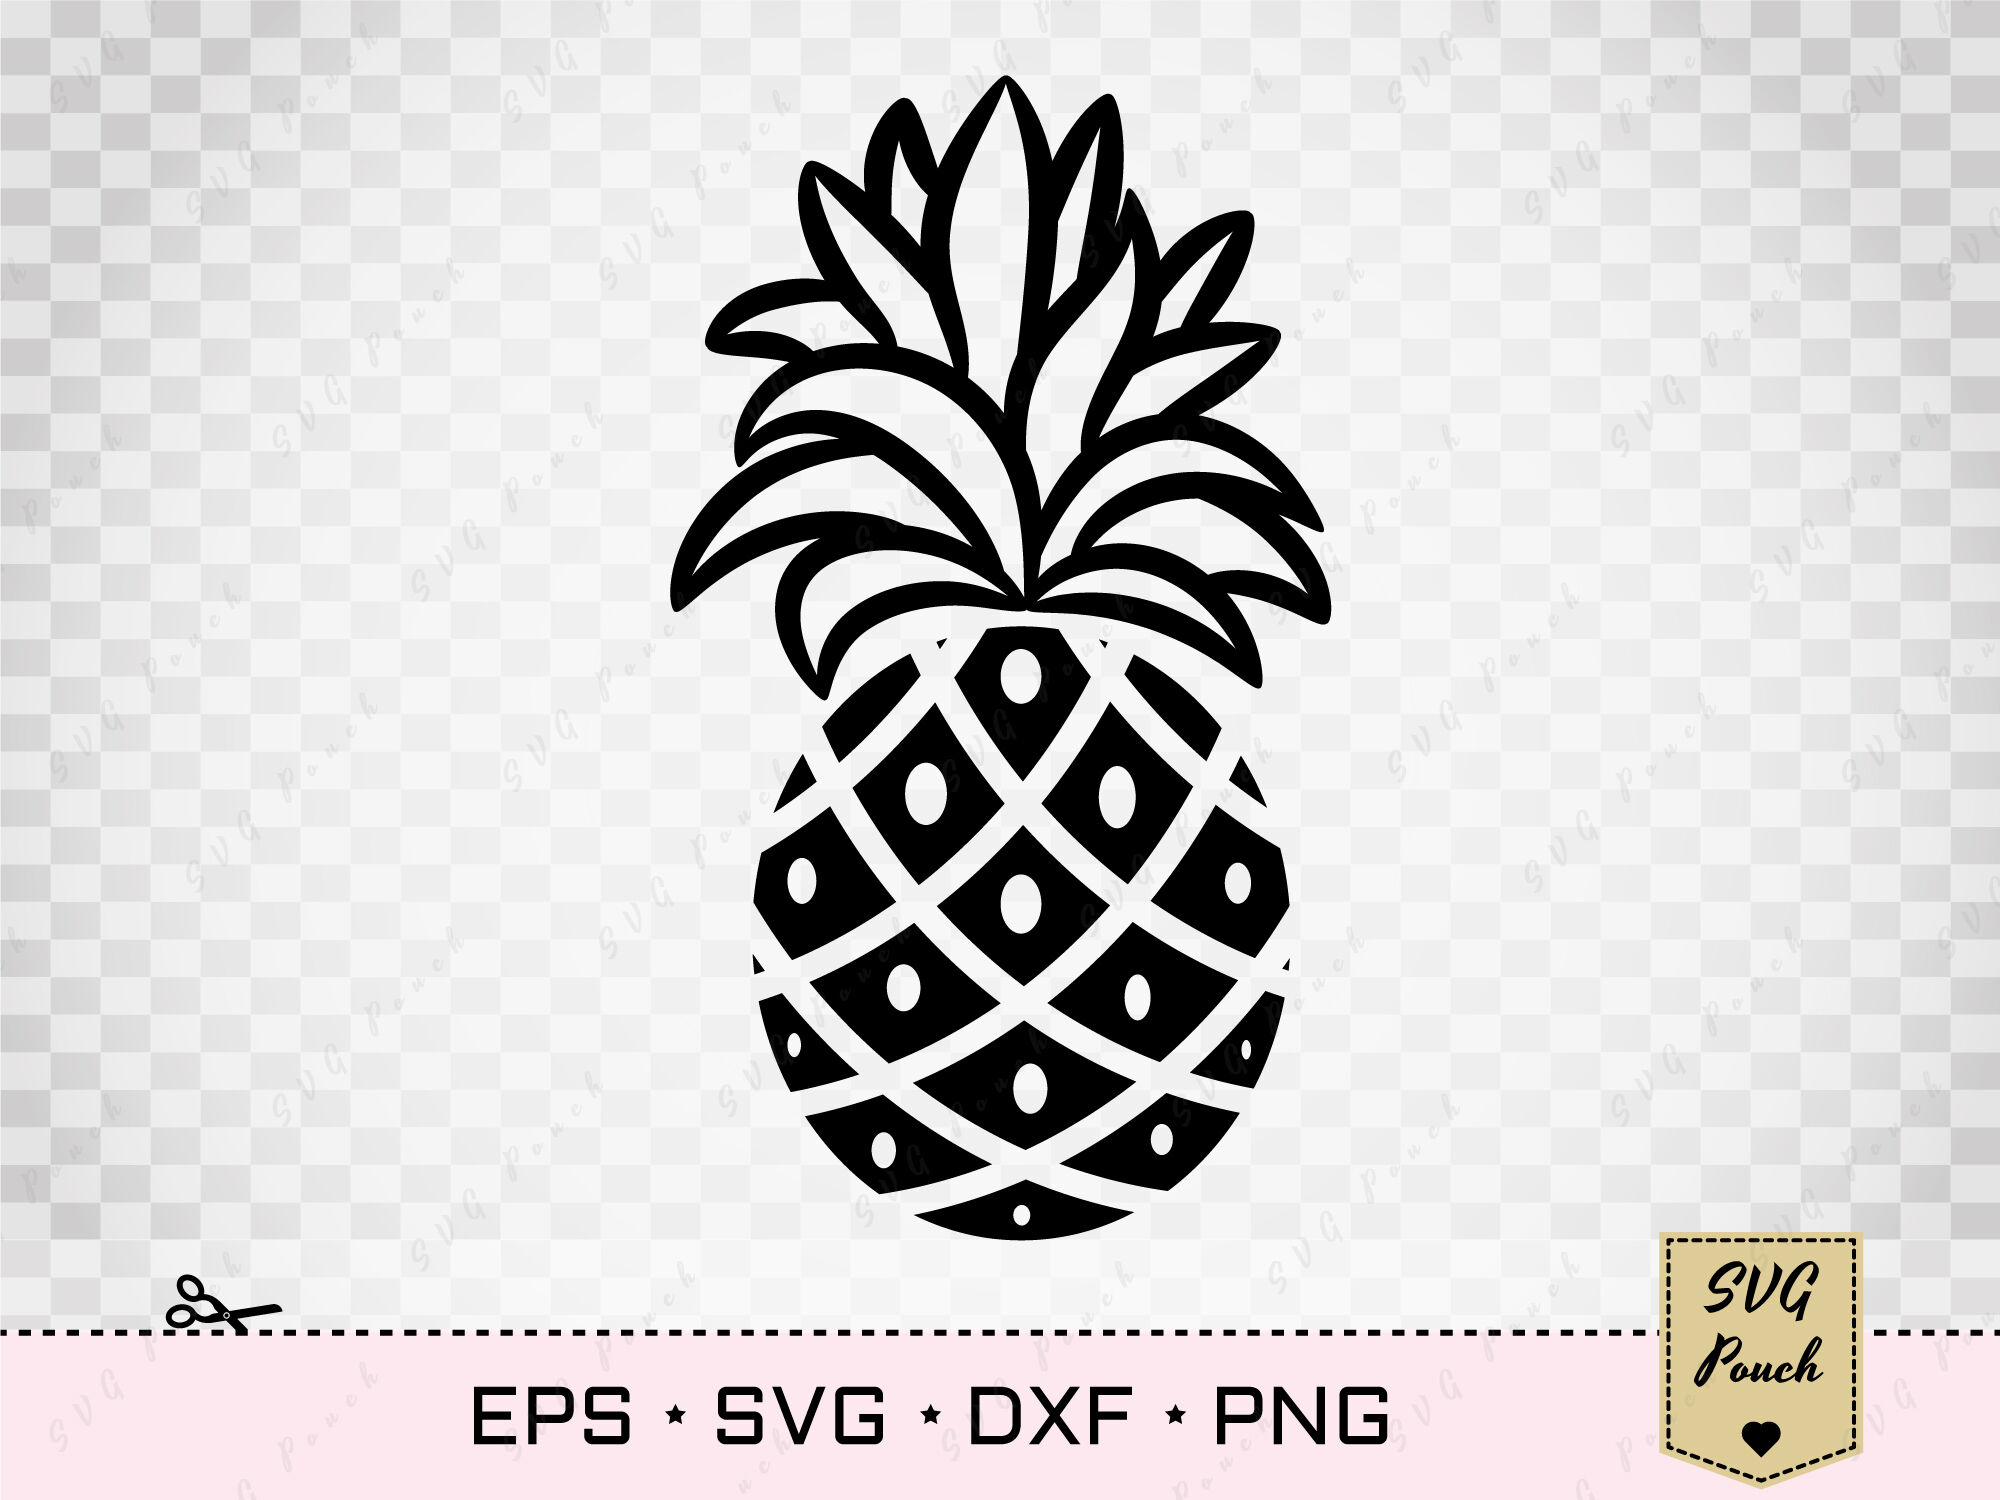 Download Pineapple Svg Silhouette By Svgpouch Thehungryjpeg Com